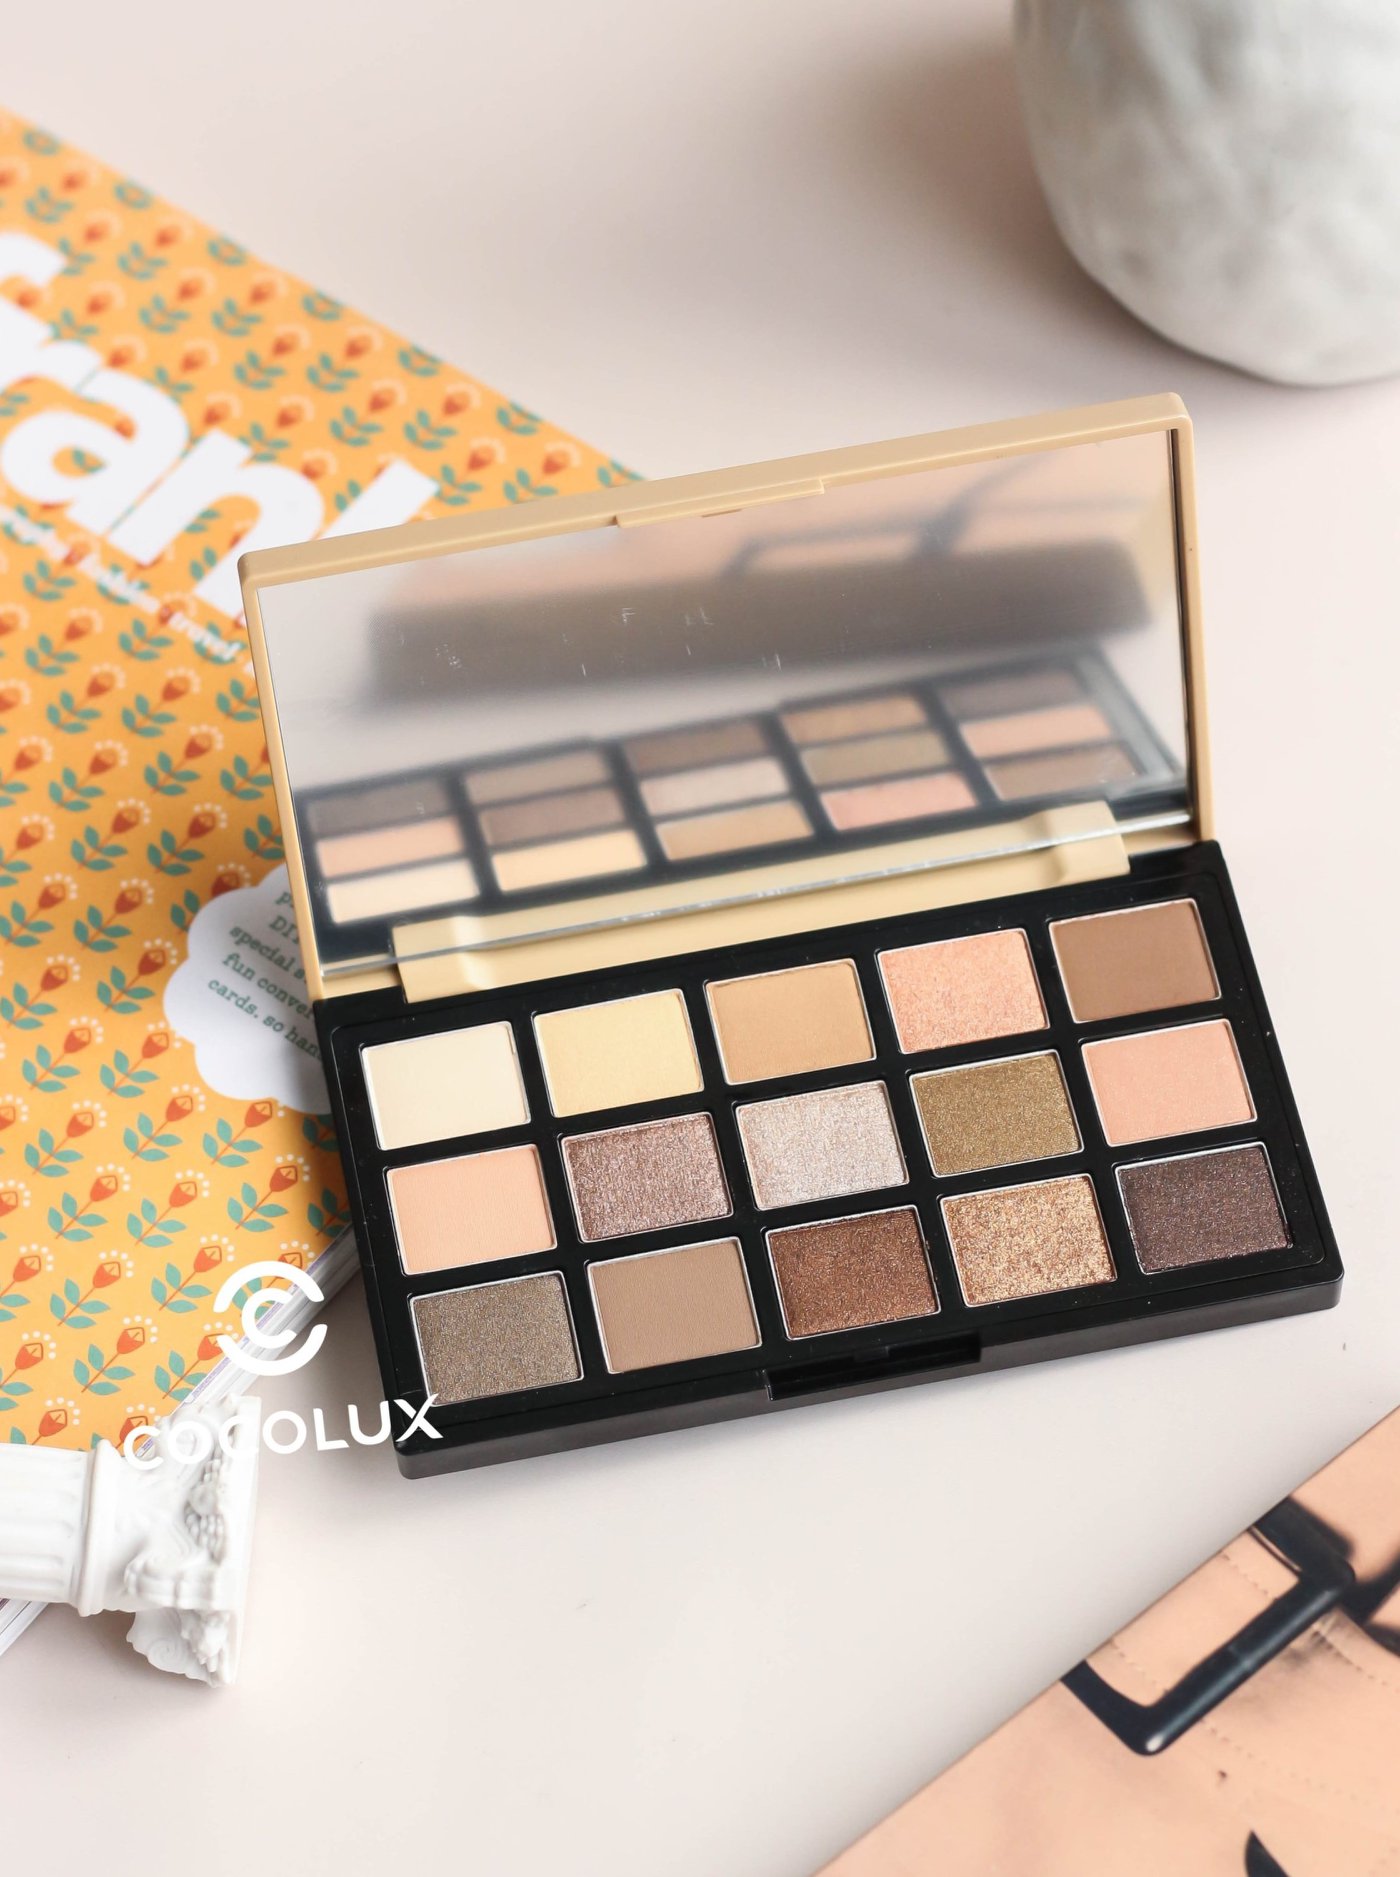 Phấn Mắt Etude House Play Color Eye Palette Trench Coat Showroom 15 Ô